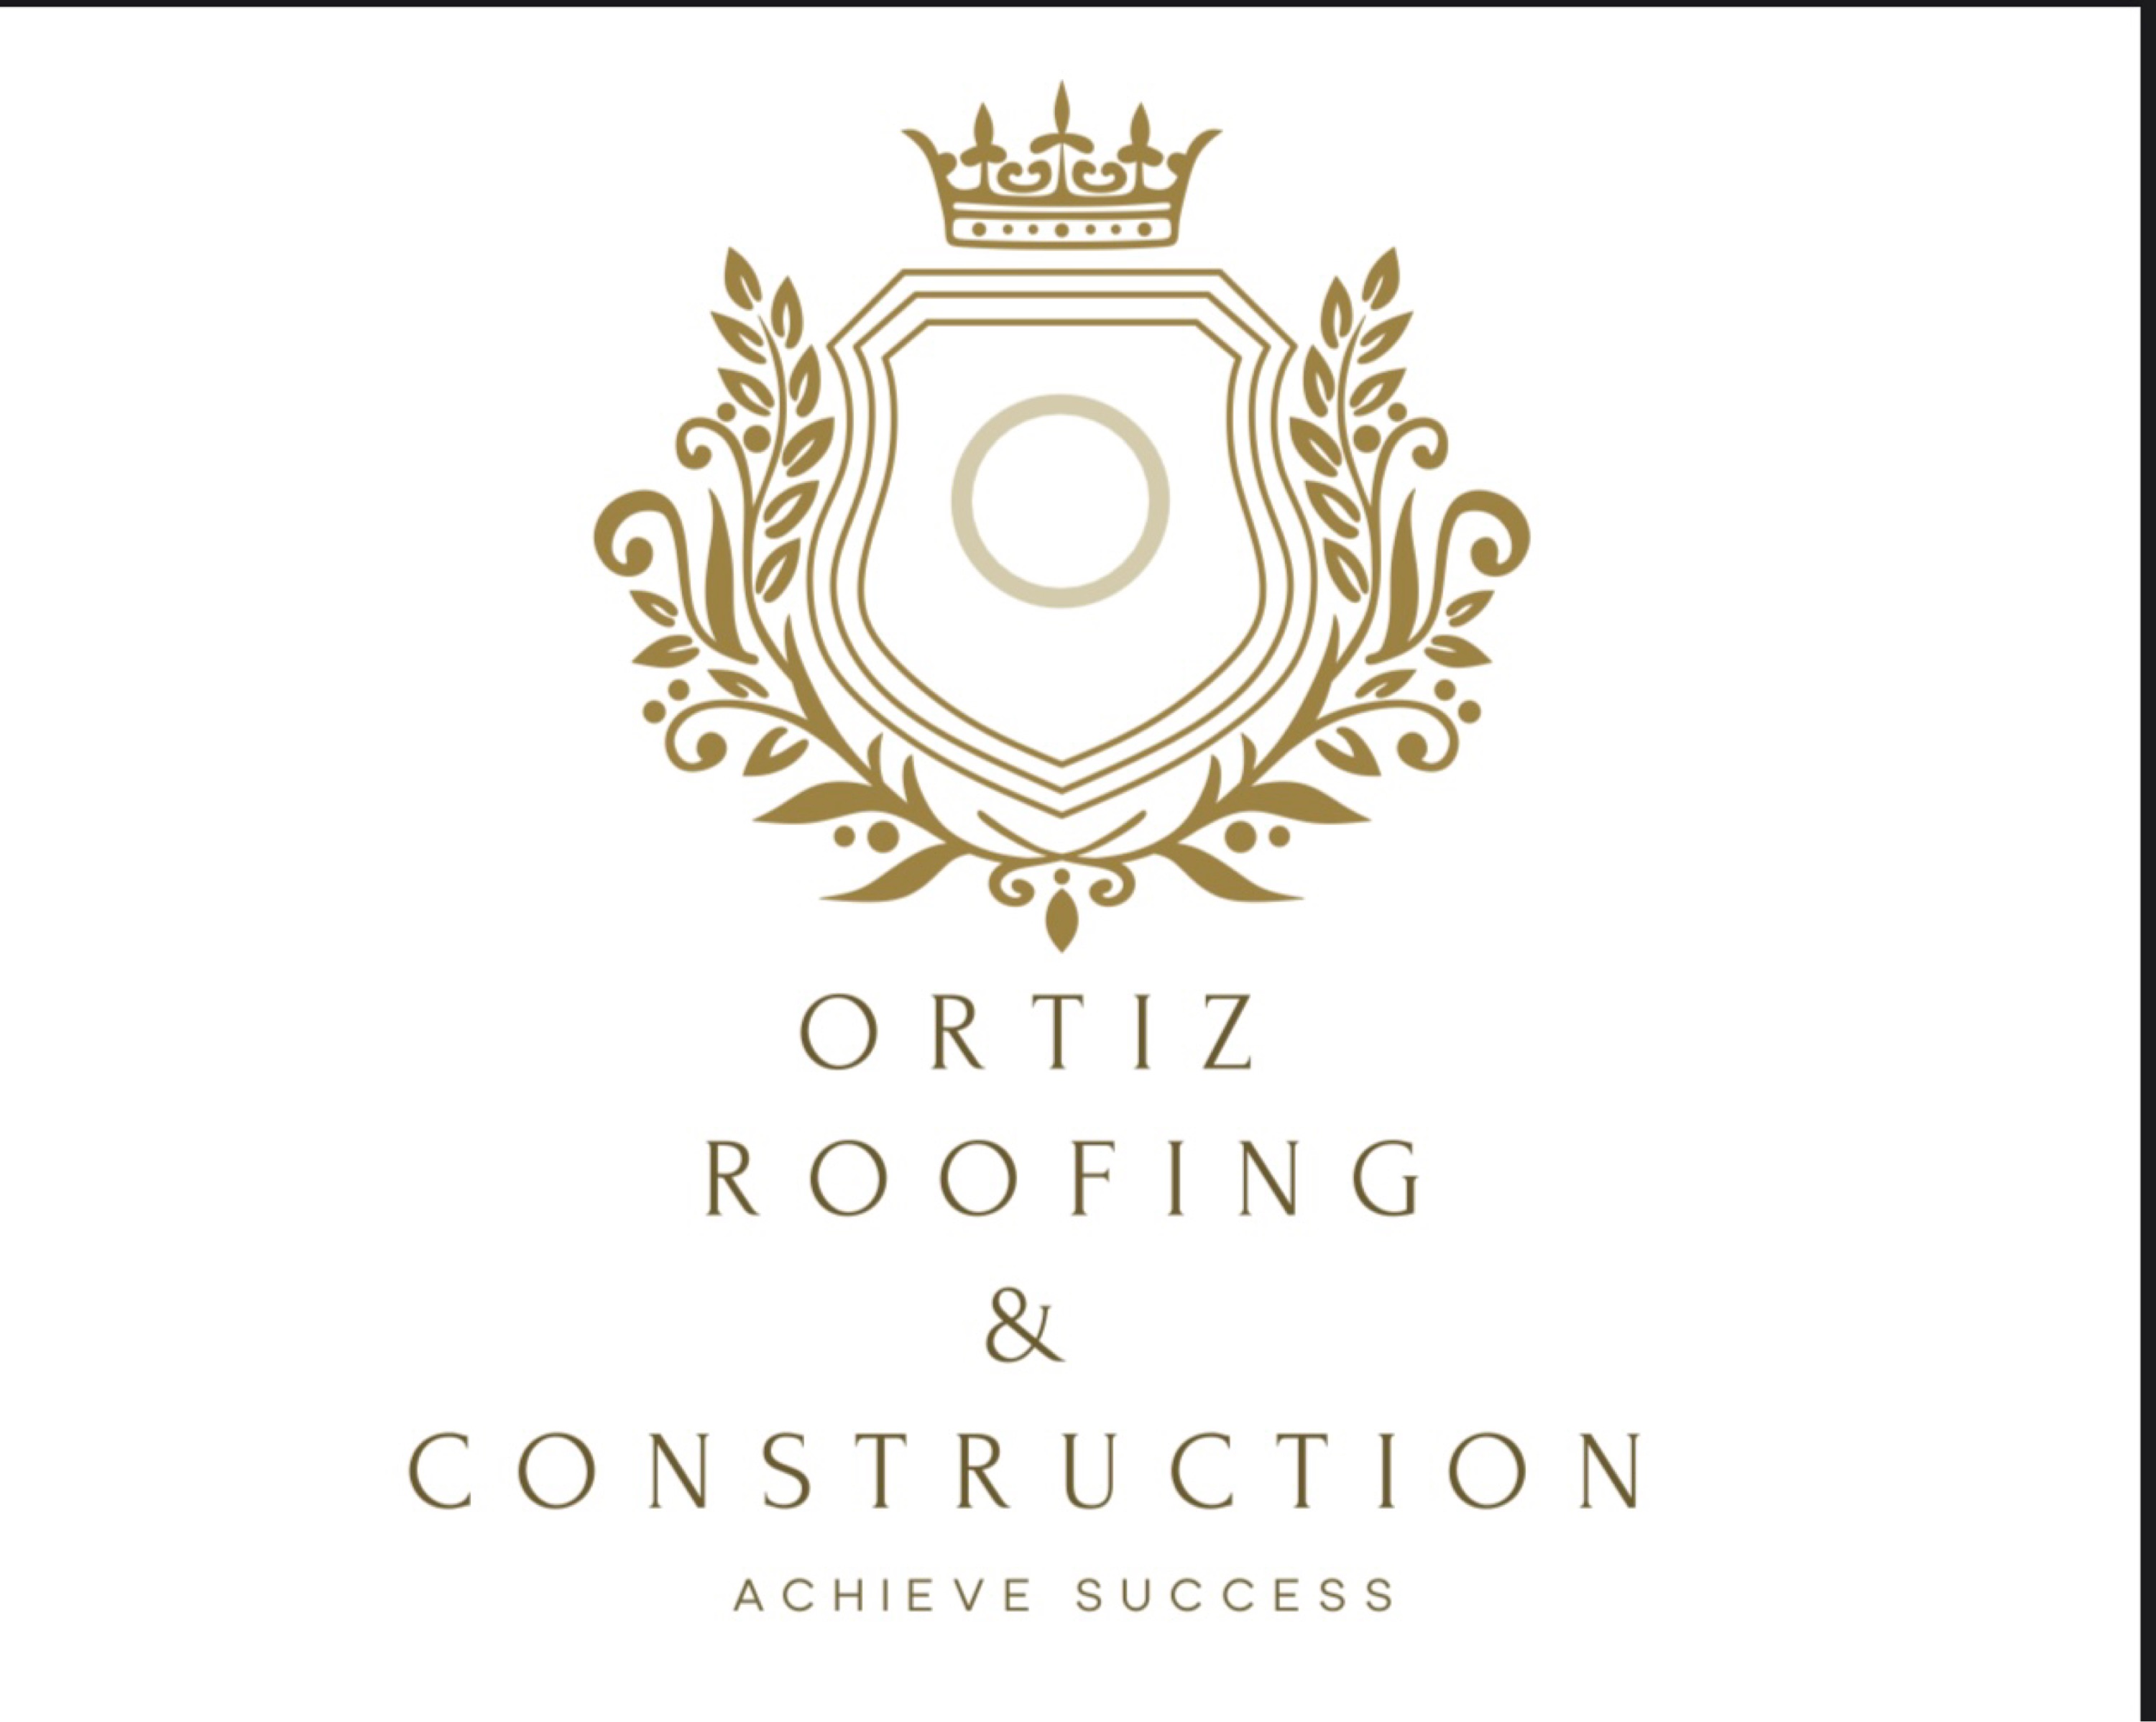 Ortiz Roofing and Construction Logo